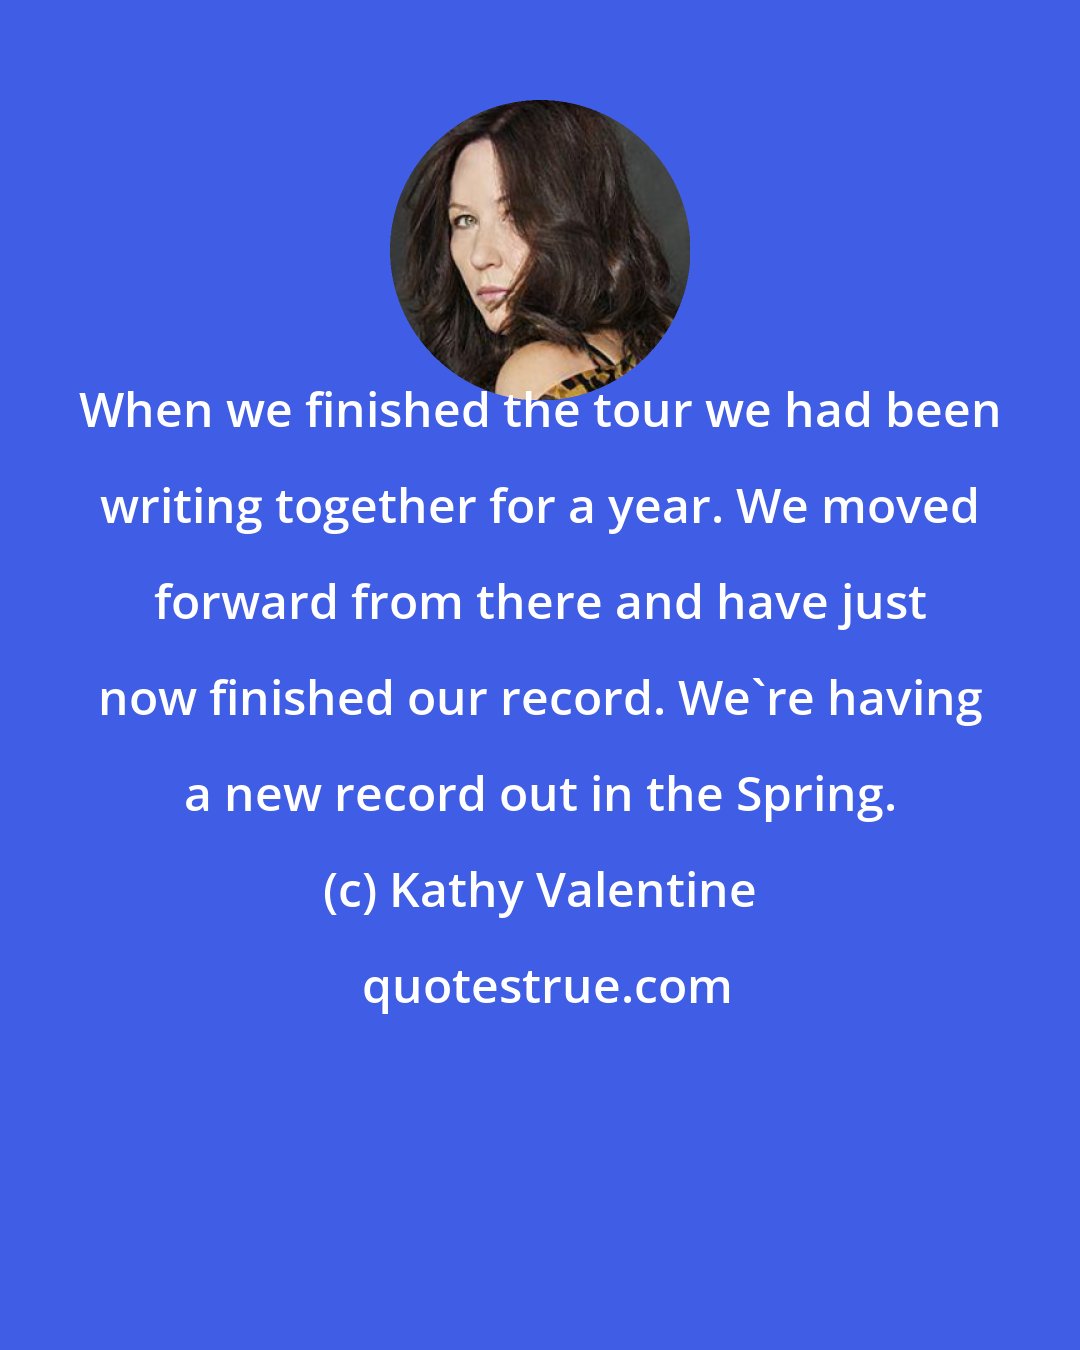 Kathy Valentine: When we finished the tour we had been writing together for a year. We moved forward from there and have just now finished our record. We're having a new record out in the Spring.